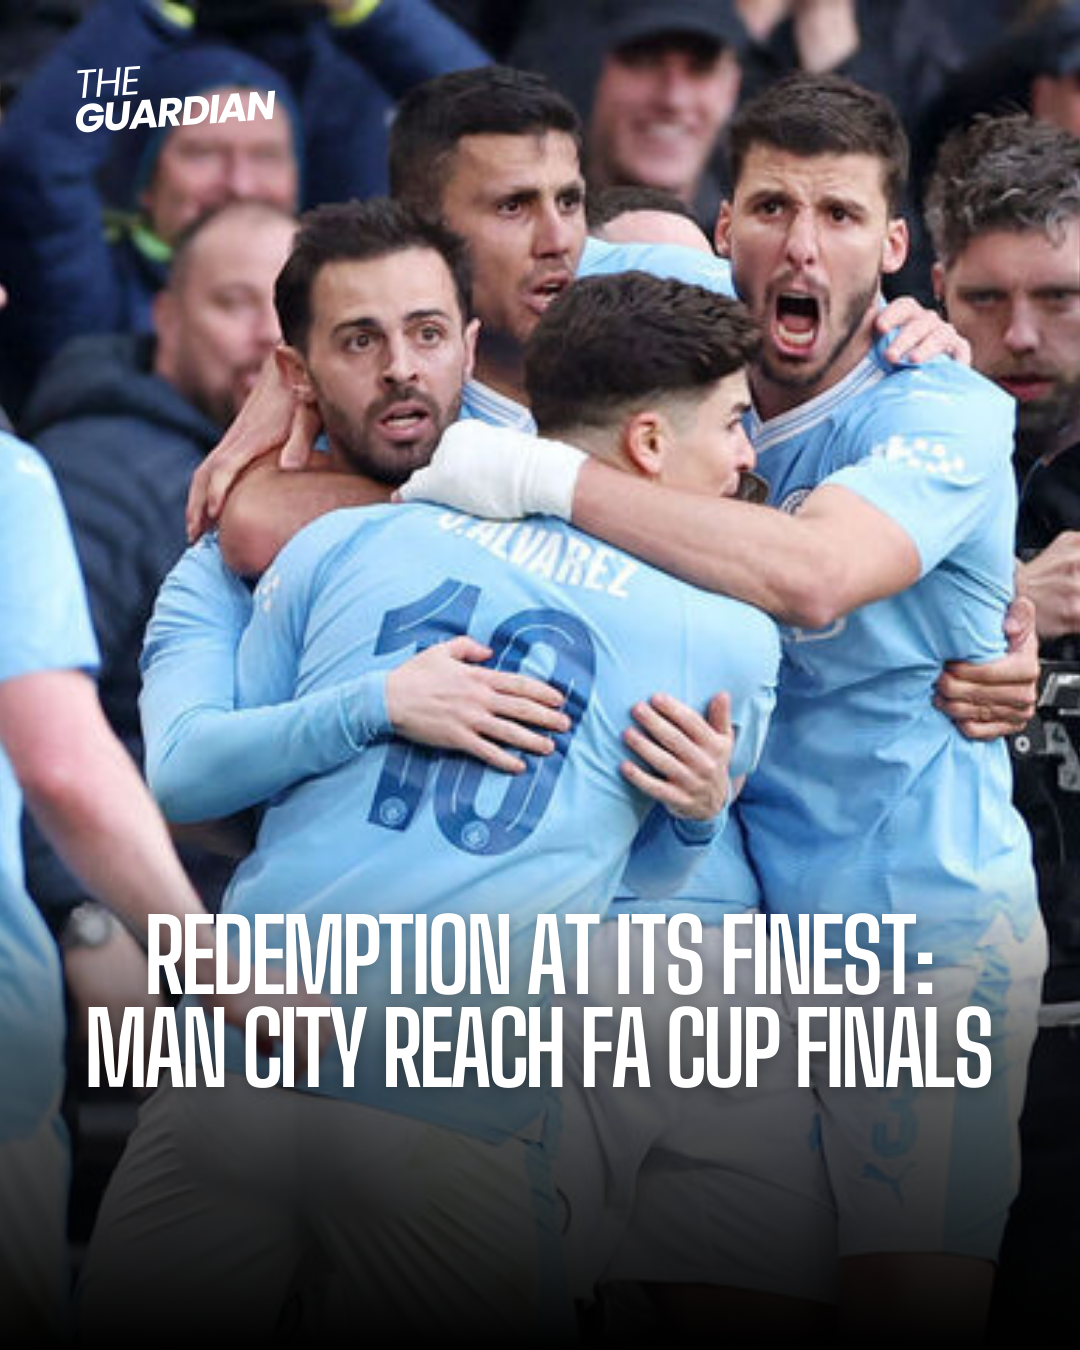 Manchester City returned from the blow of their Champions League quarter-final departure to Real Madrid. Bernardo Silva's late strike plunged Chelsea at Wembley to cement a place in the FA Cup final.